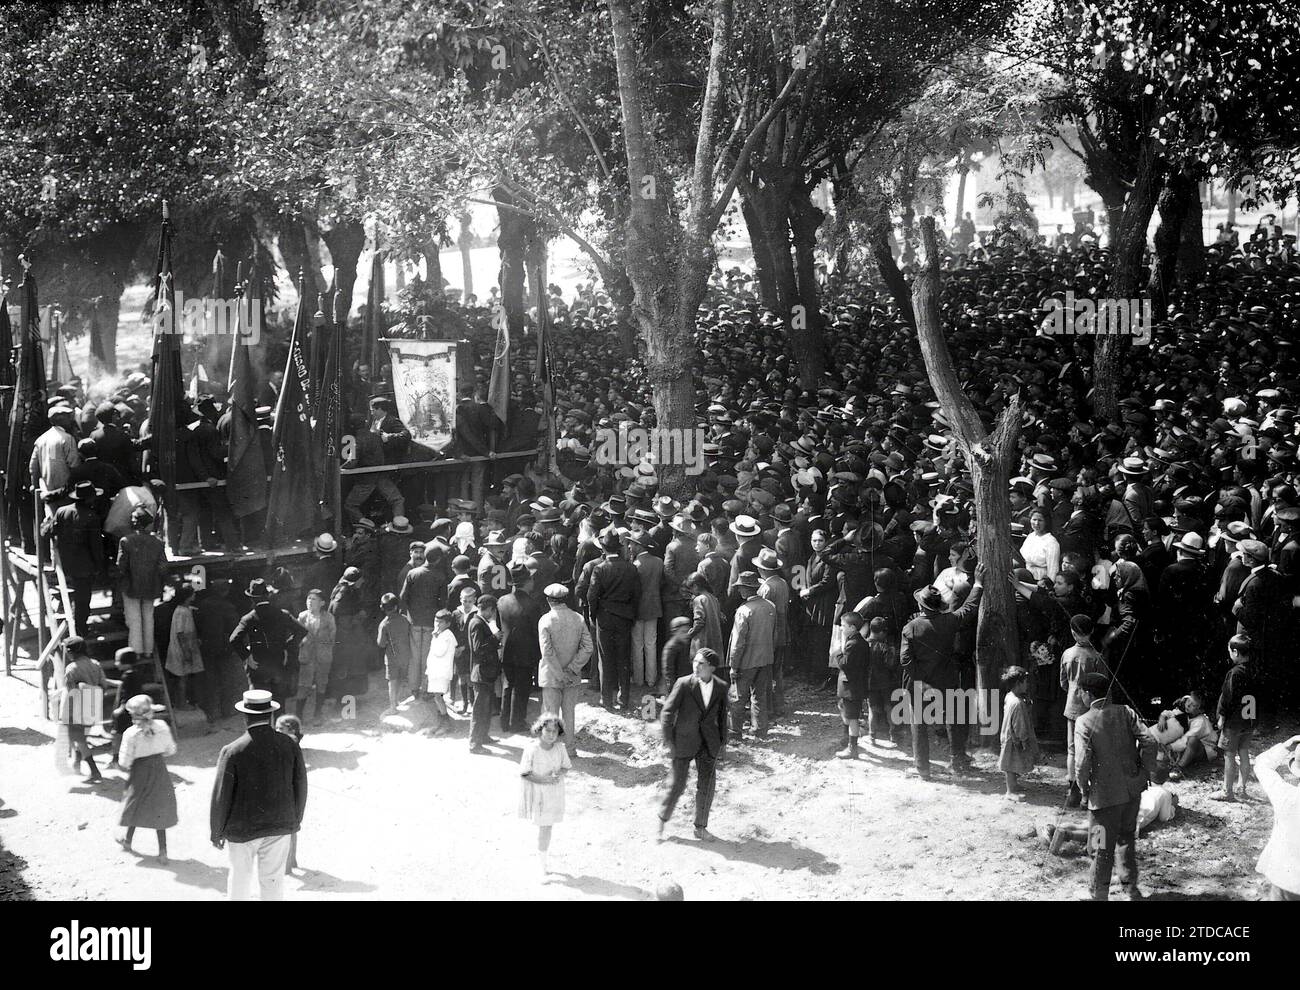 08/31/1922. Vigo. For the redemption of the Forums. Antiforal Rally organized by the Agrarian Federation of Washers. Photo: Jaime Pacheco. Credit: Album / Archivo ABC / Jaime Pacheco Stock Photo